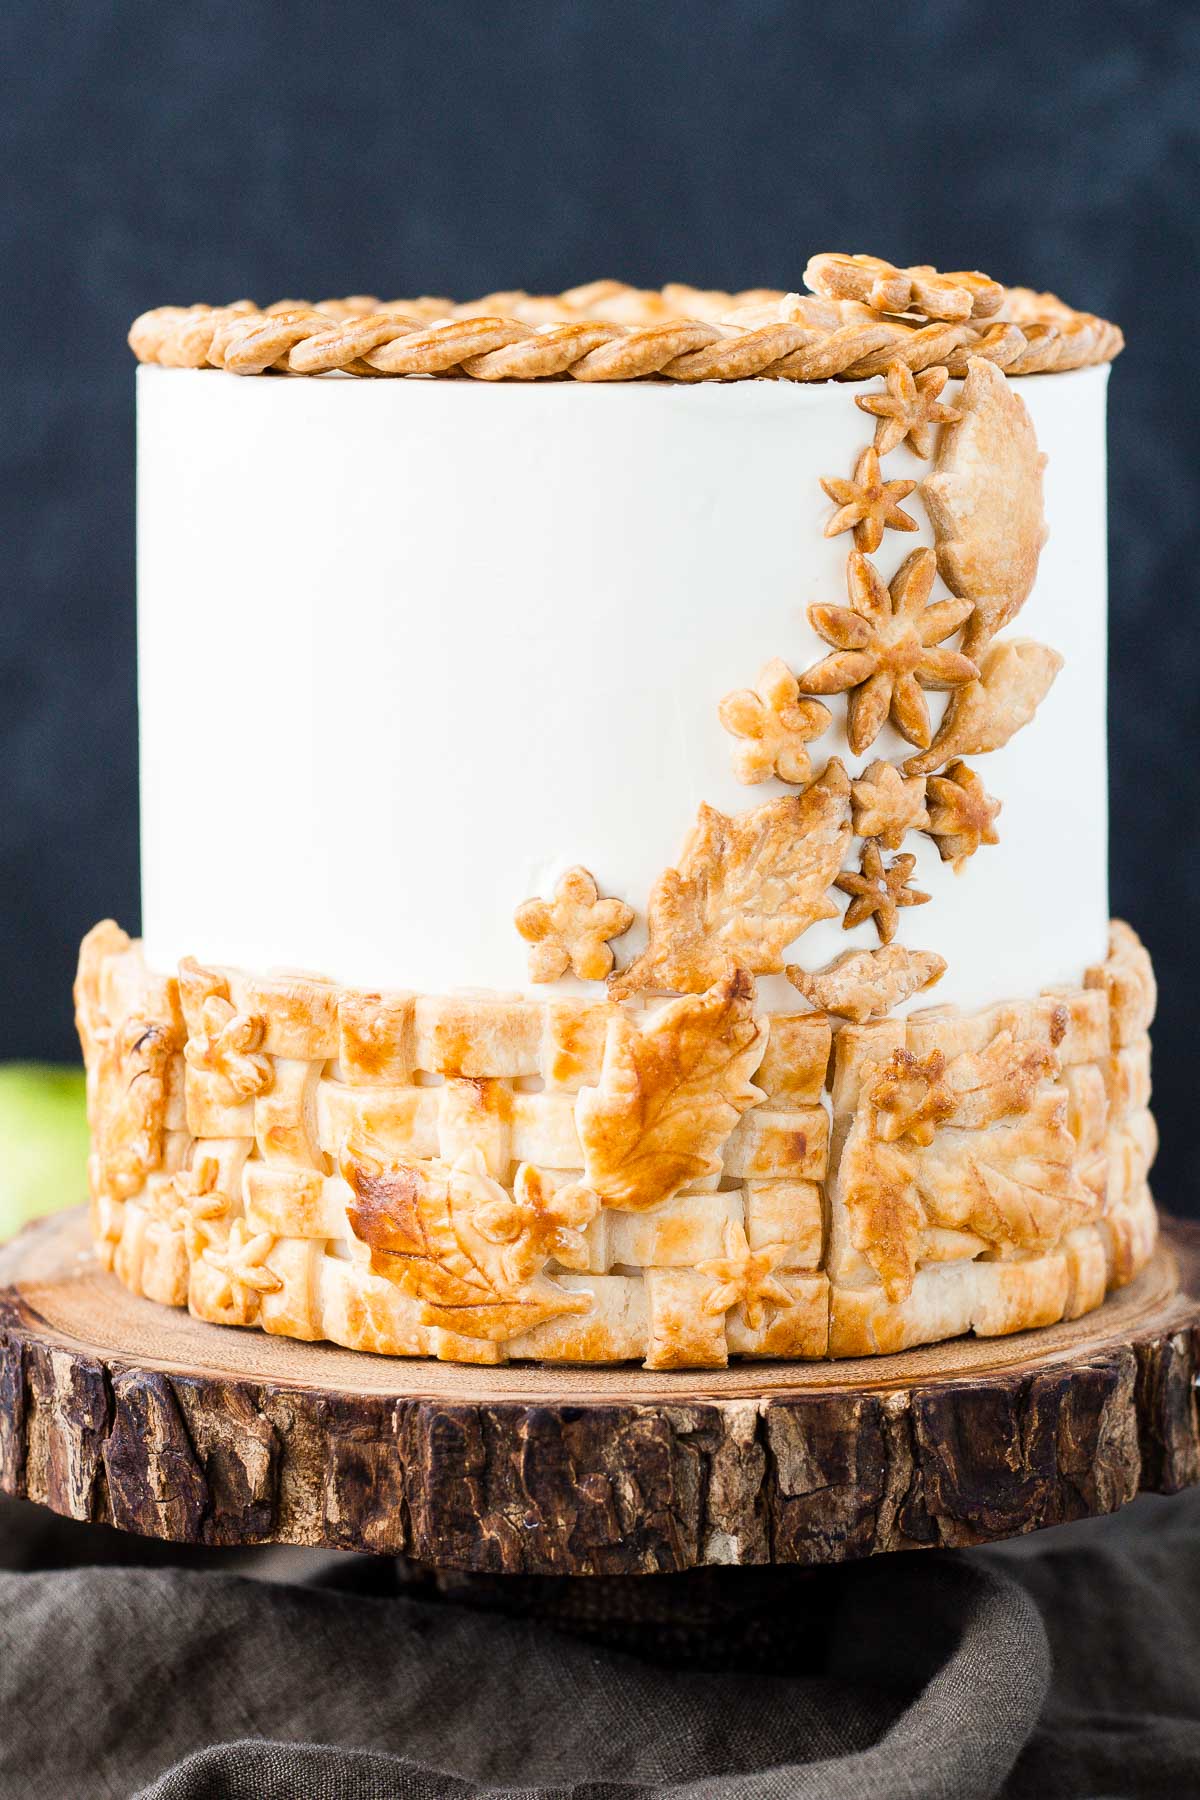 A cake sitting on top of a rustic wooden cake stand with apples in the background.